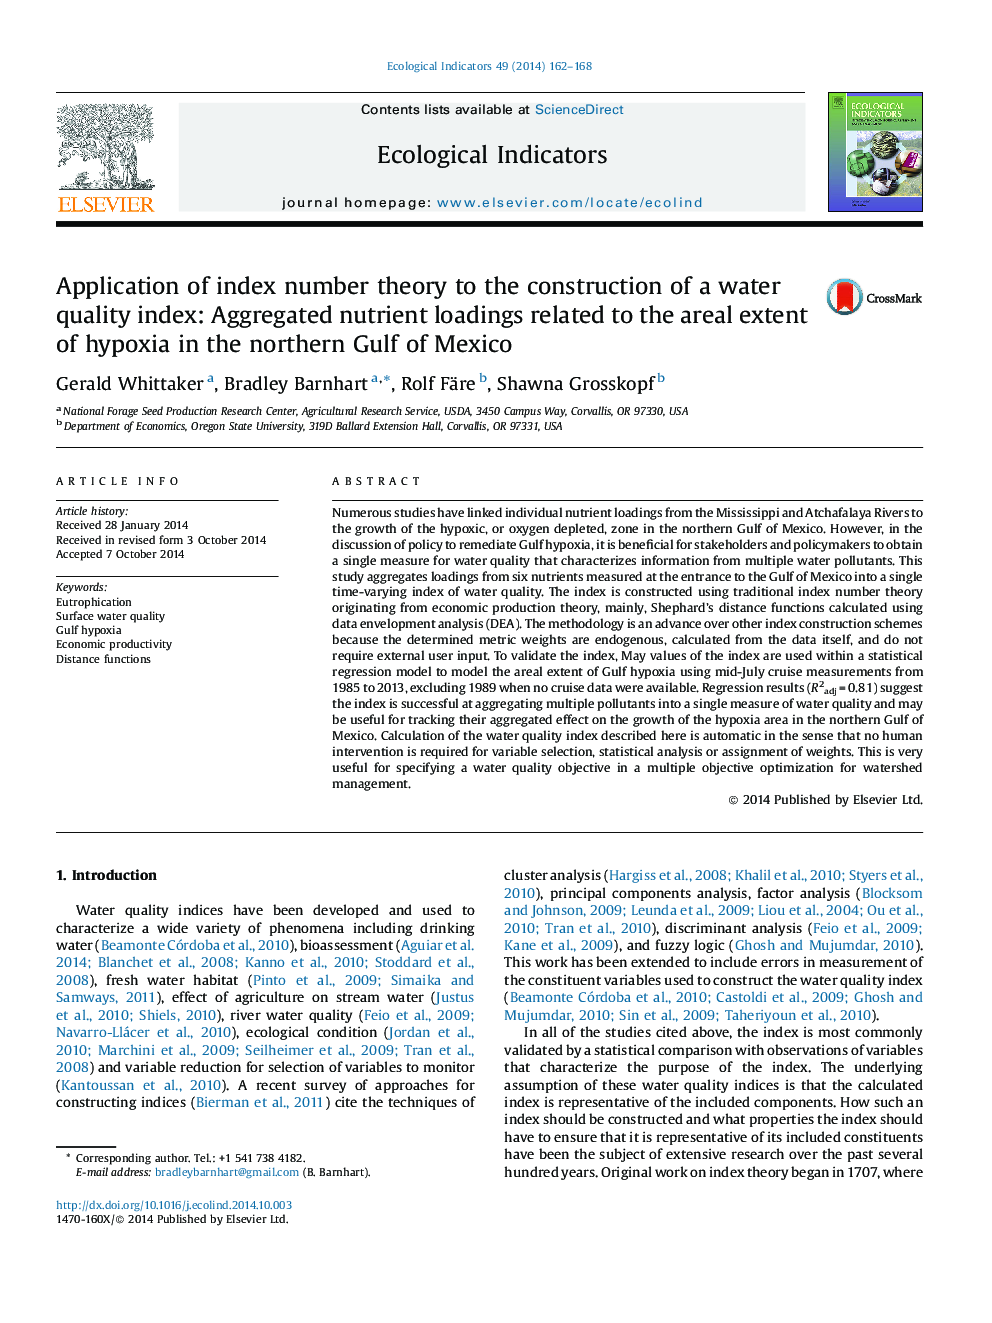 Application of index number theory to the construction of a water quality index: Aggregated nutrient loadings related to the areal extent of hypoxia in the northern Gulf of Mexico